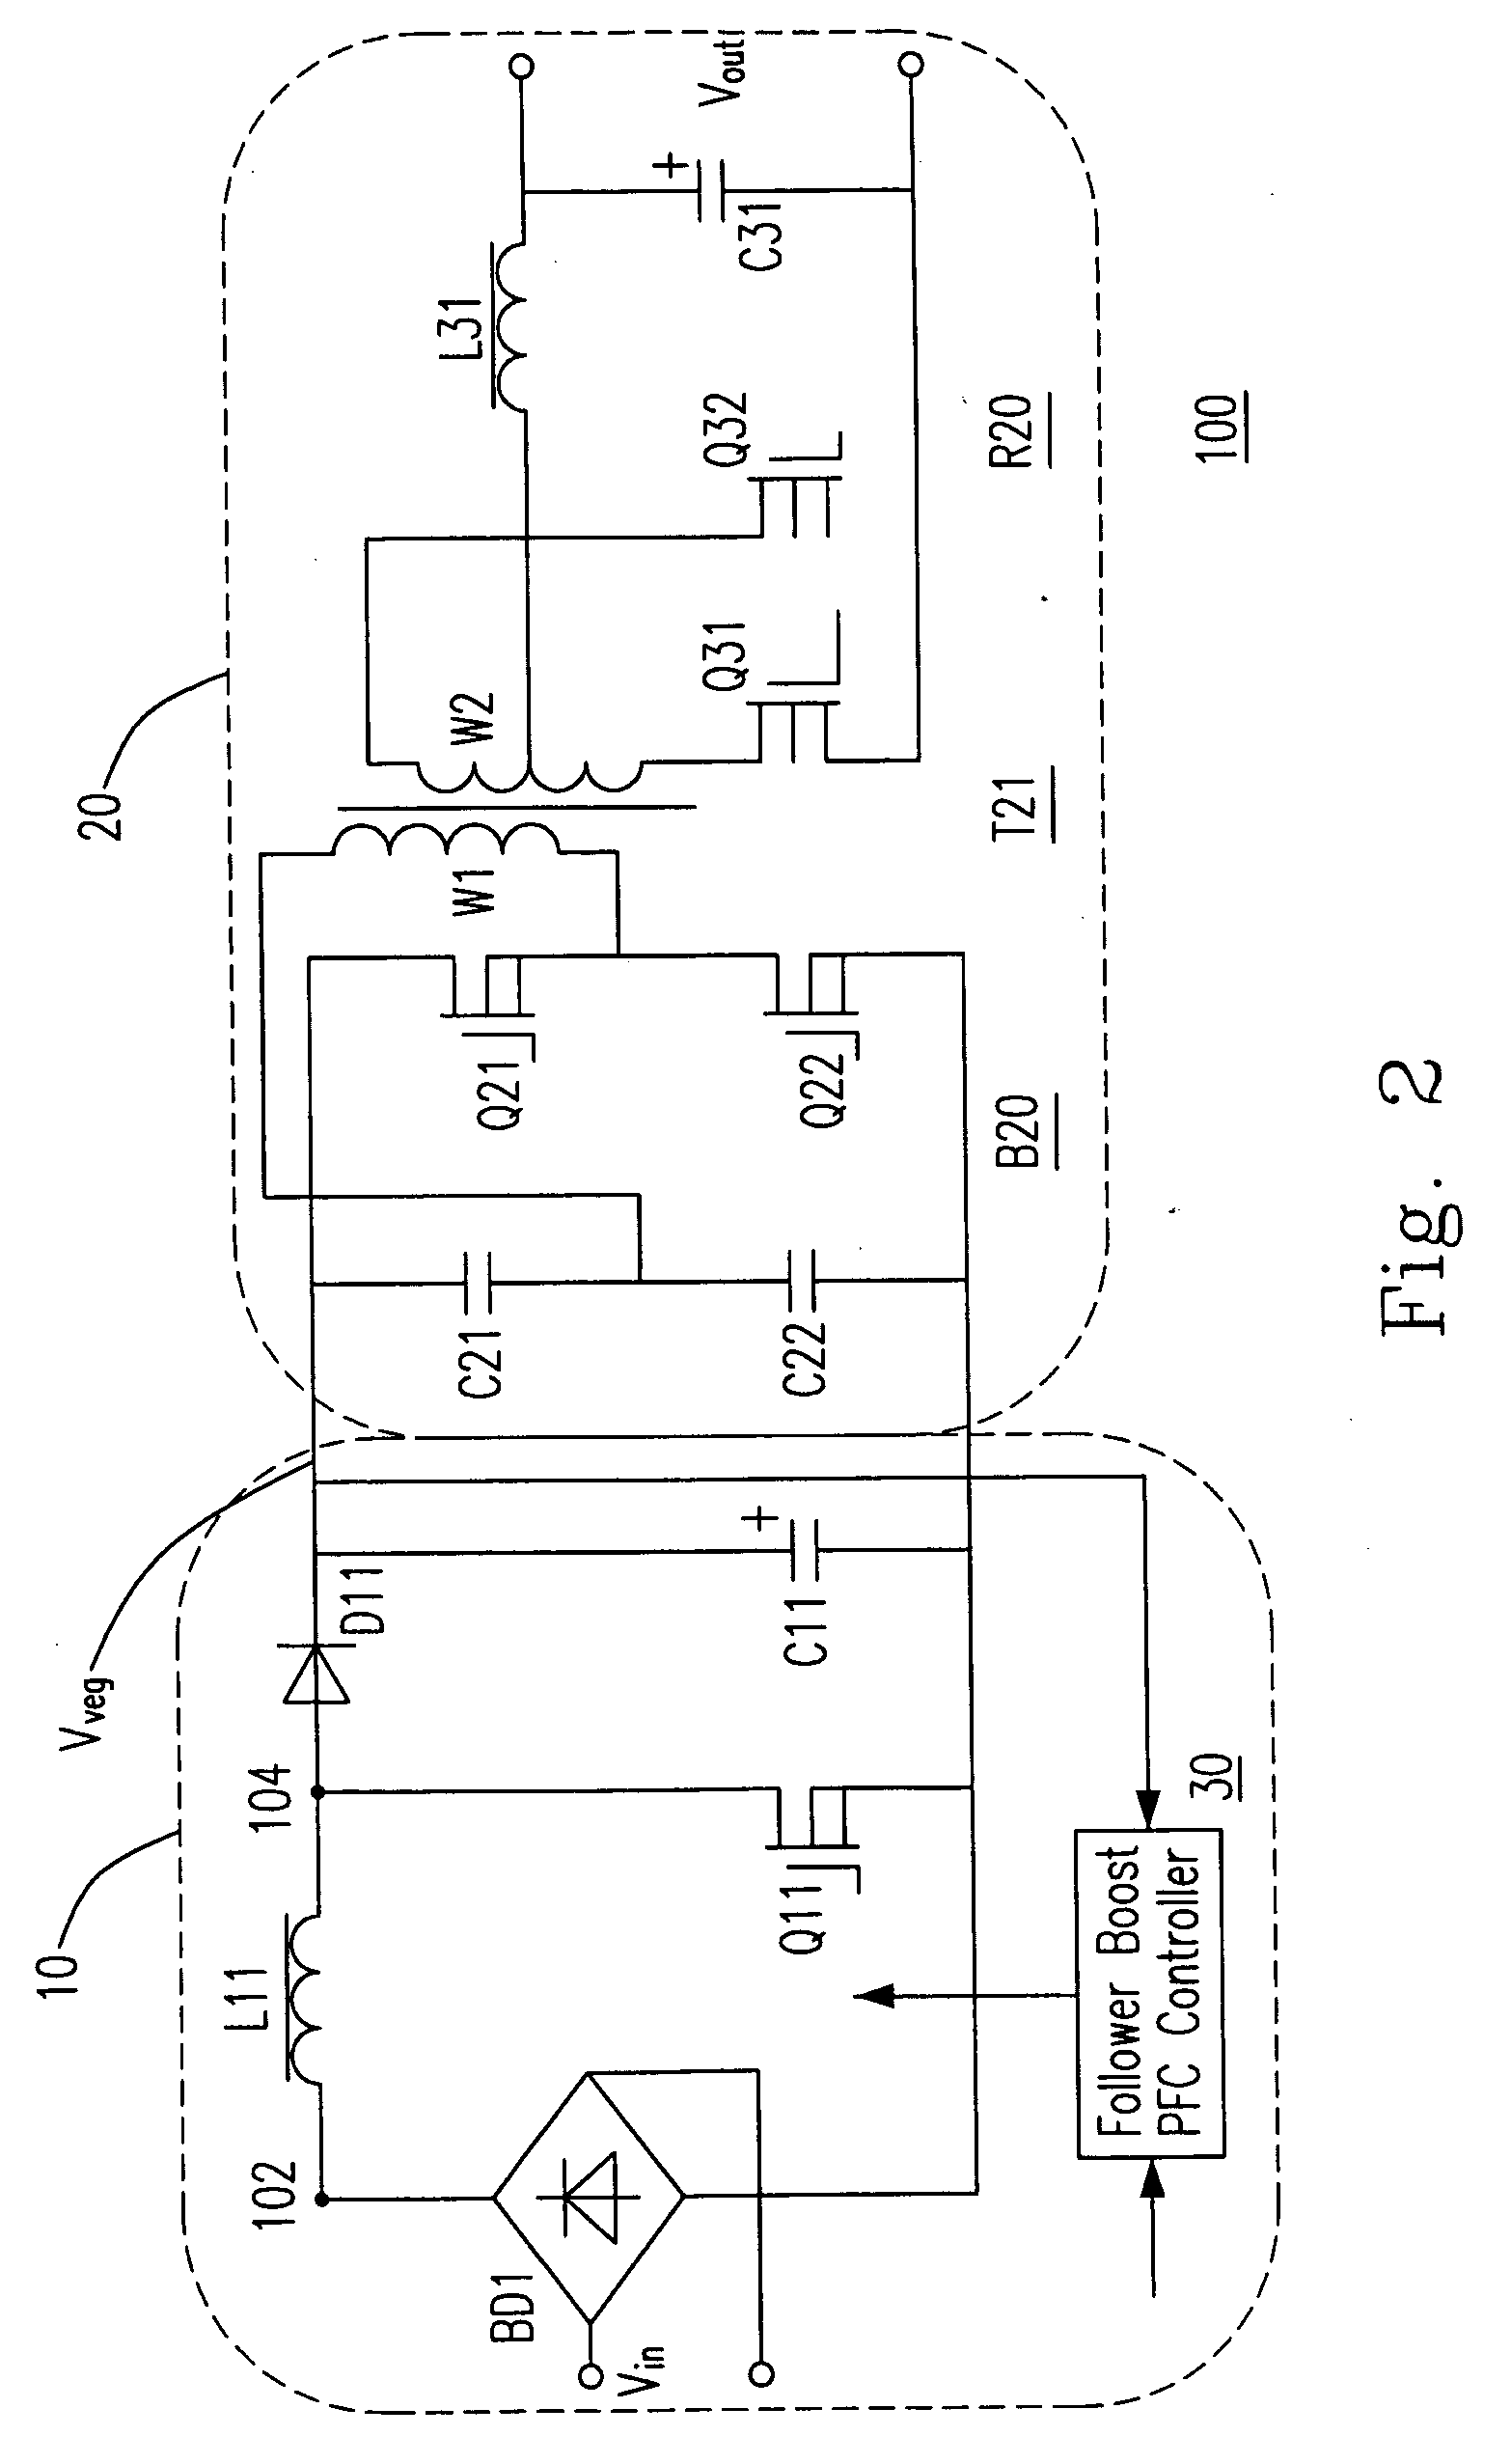 High efficiency power converter with synchronous rectification